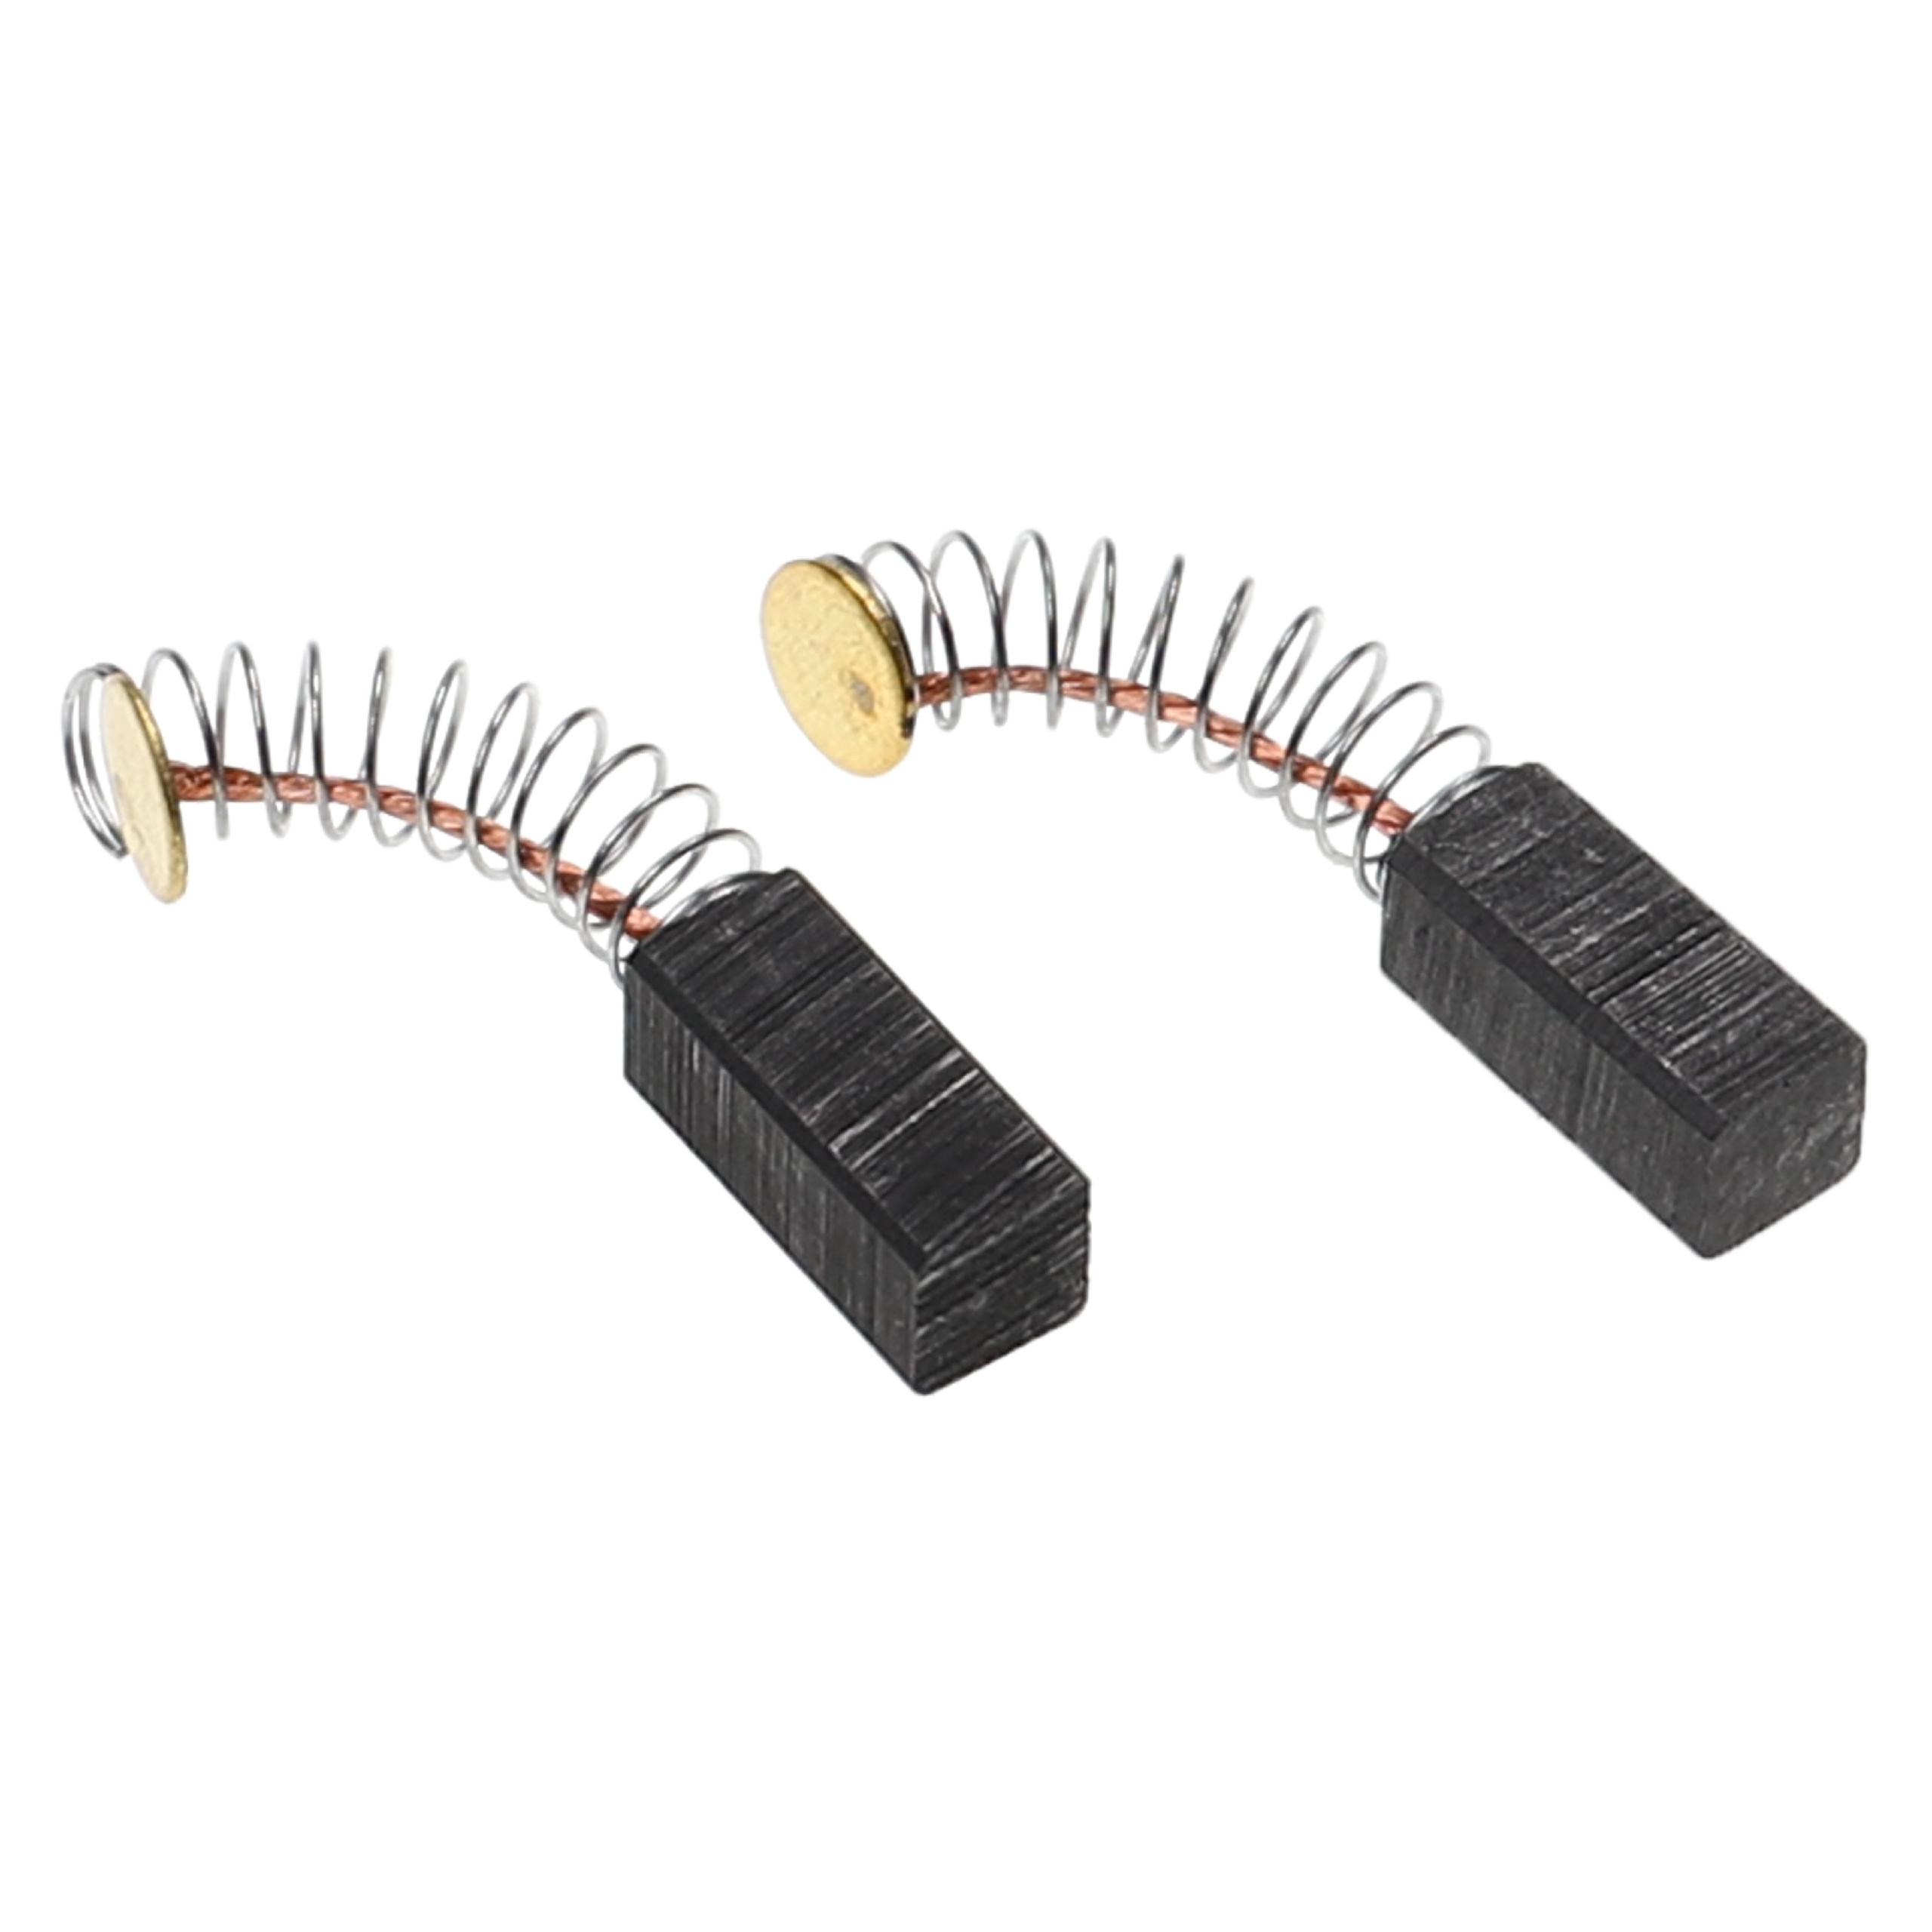 2x Carbon Brush as Replacement for Bosch 2.604.321.904 Electric Power Tools + Spring, 6.3 x 6.3 x 15.5mm